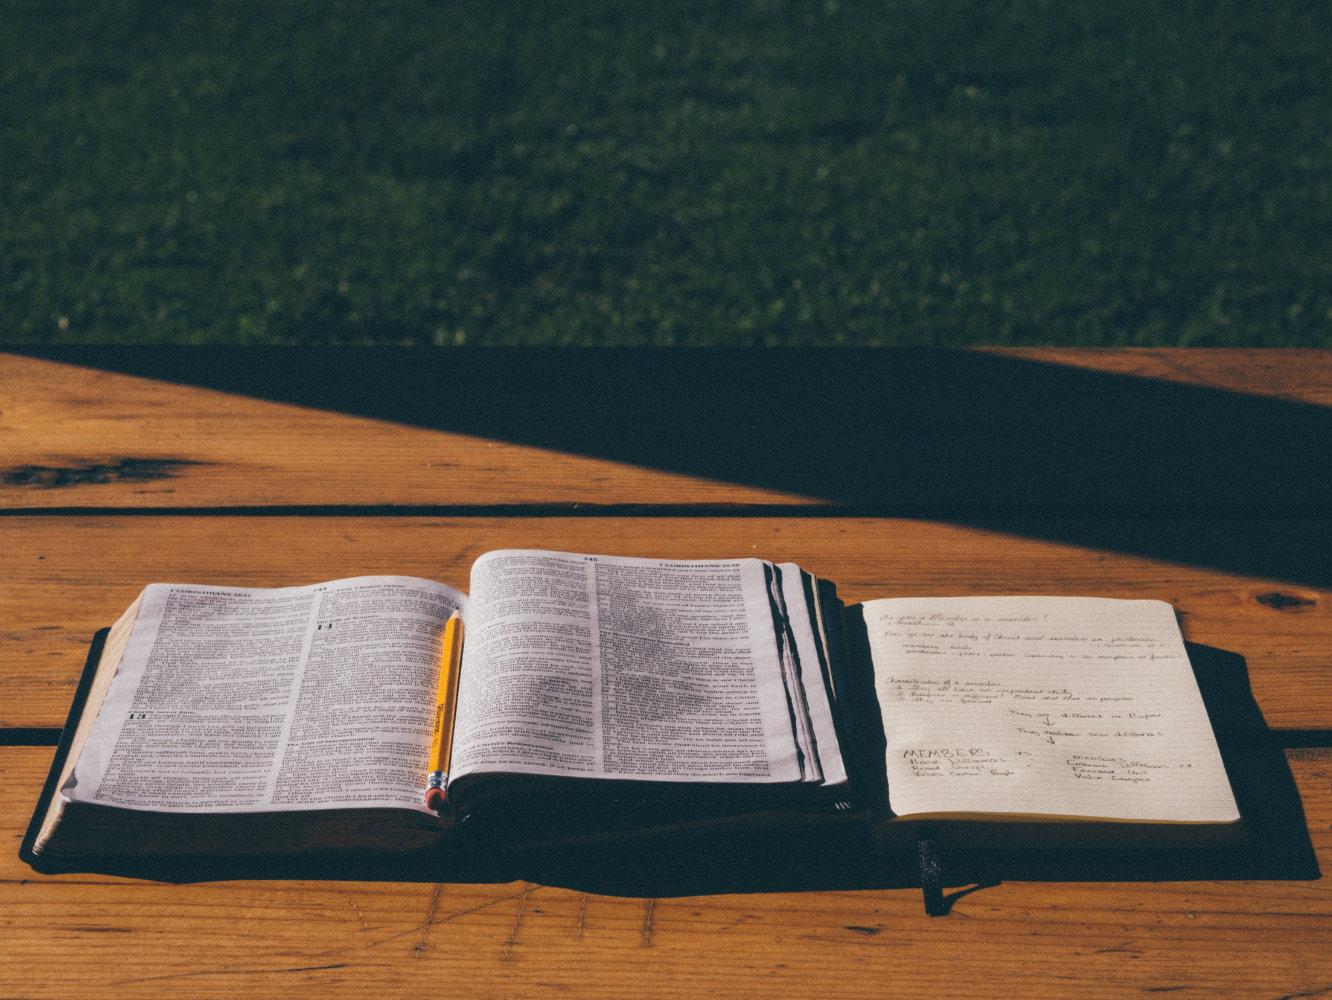 Study Your Sermon Notes for All They’re Worth